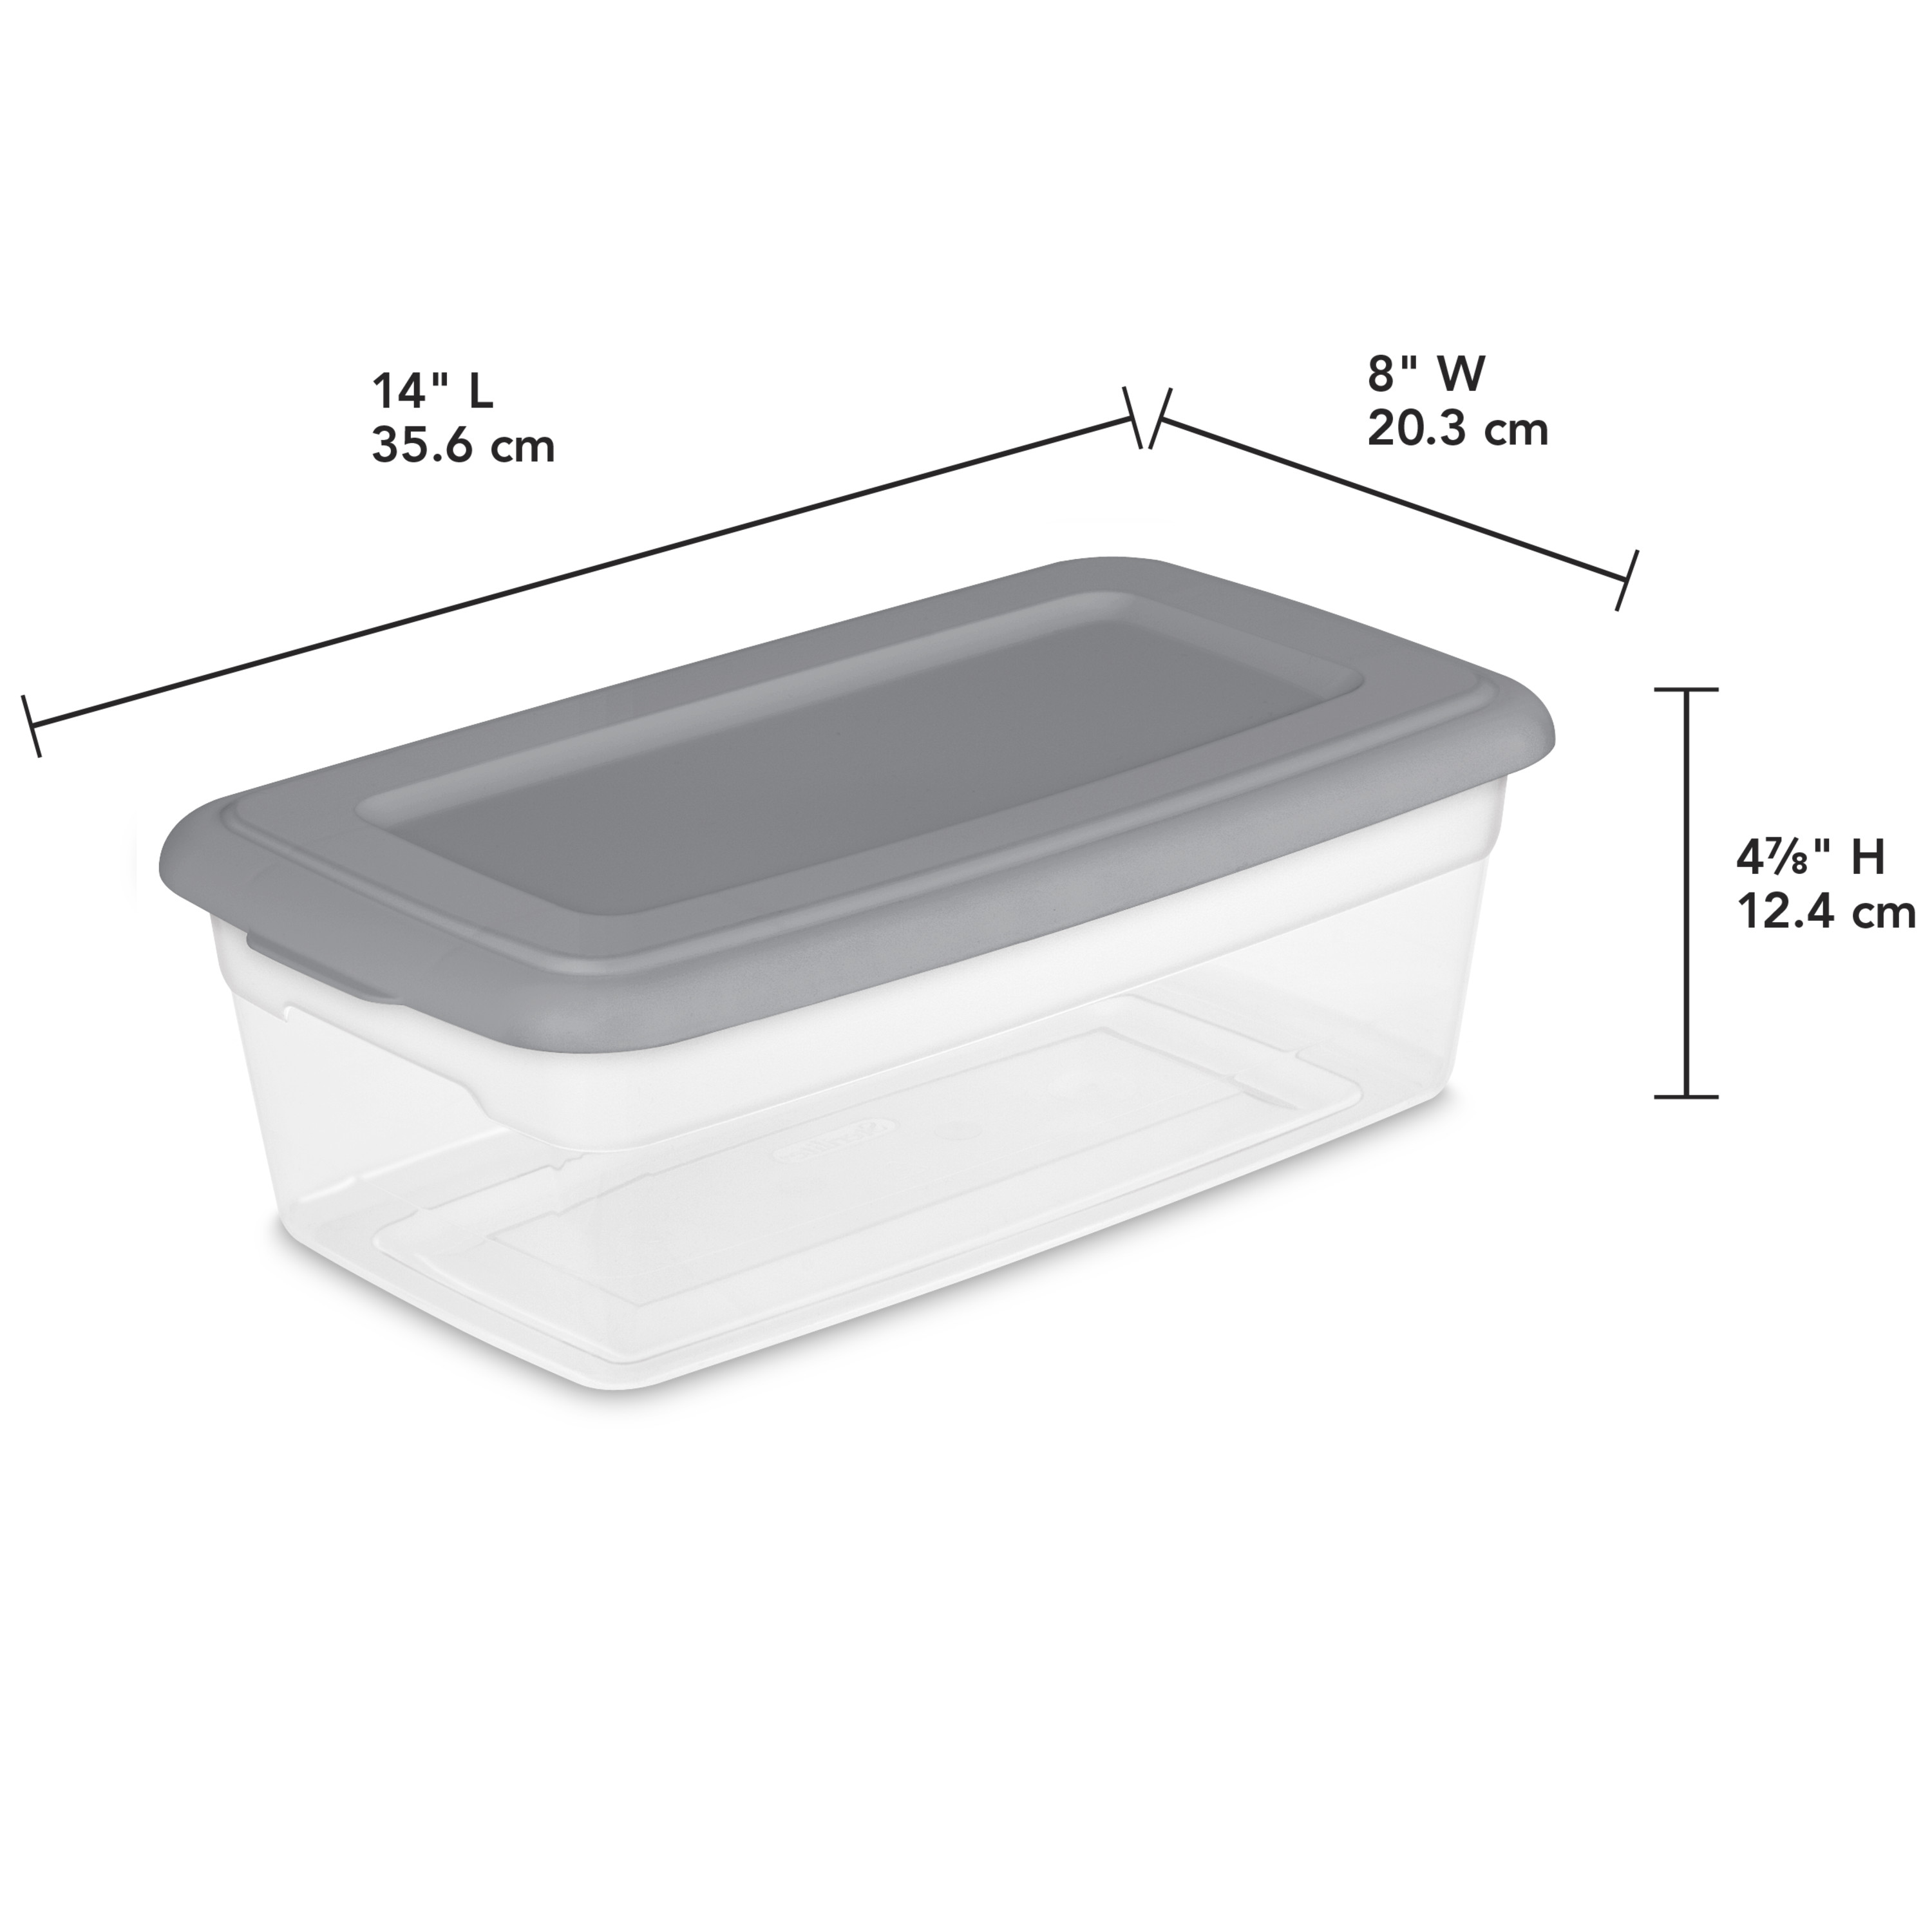 Sterilite Set of (10) 6 Qt. Clear Plastic Storage Boxes with Gray Lids - image 4 of 8